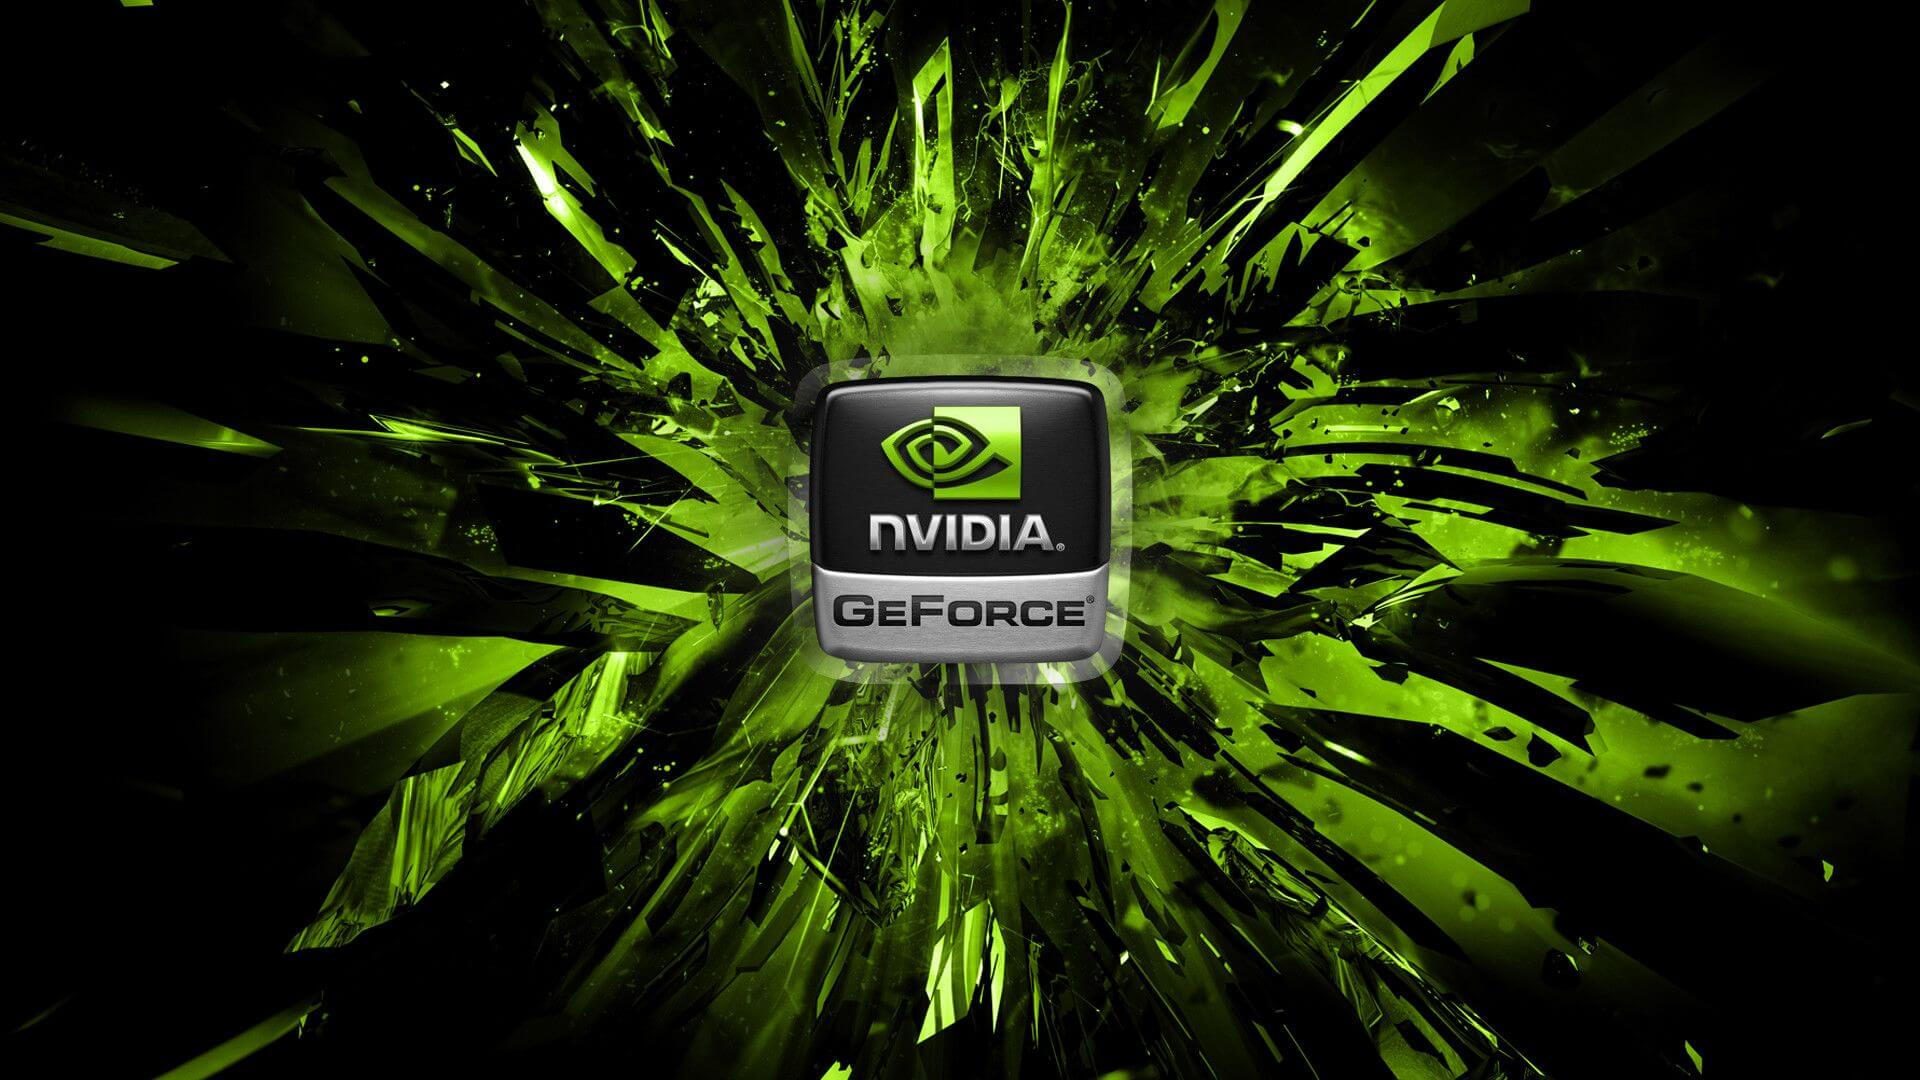 rtx-io-for-geforce-gpus-available-now